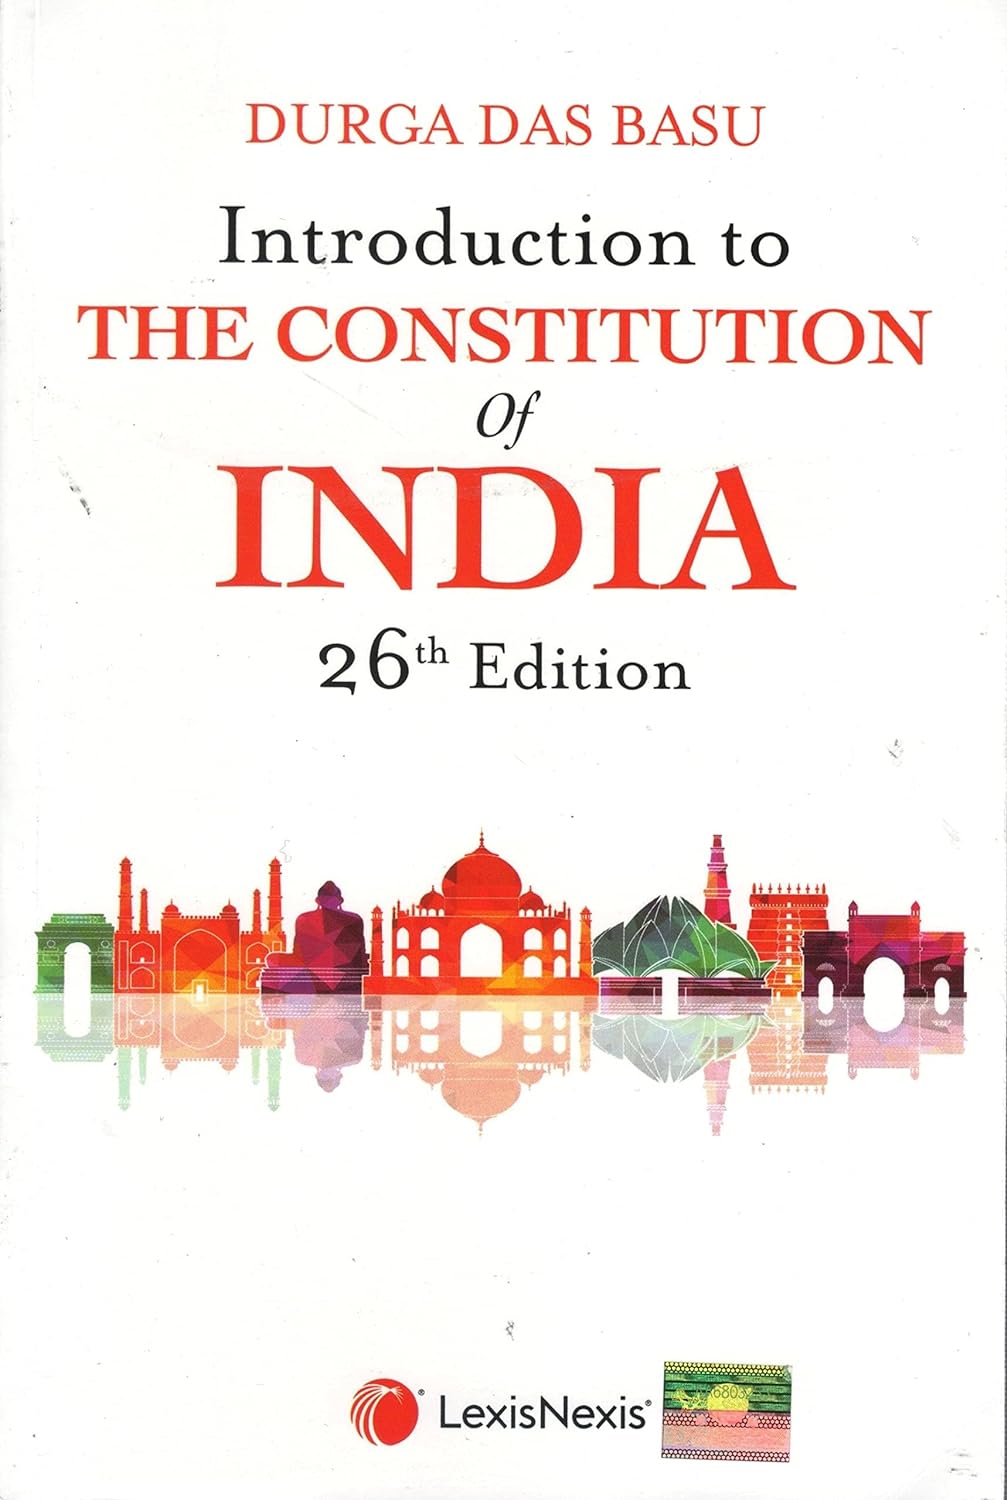 INTRODUCTION TO THE CONSTITUTION OF INDIA 26th edition (DURGA DAS. BASU)